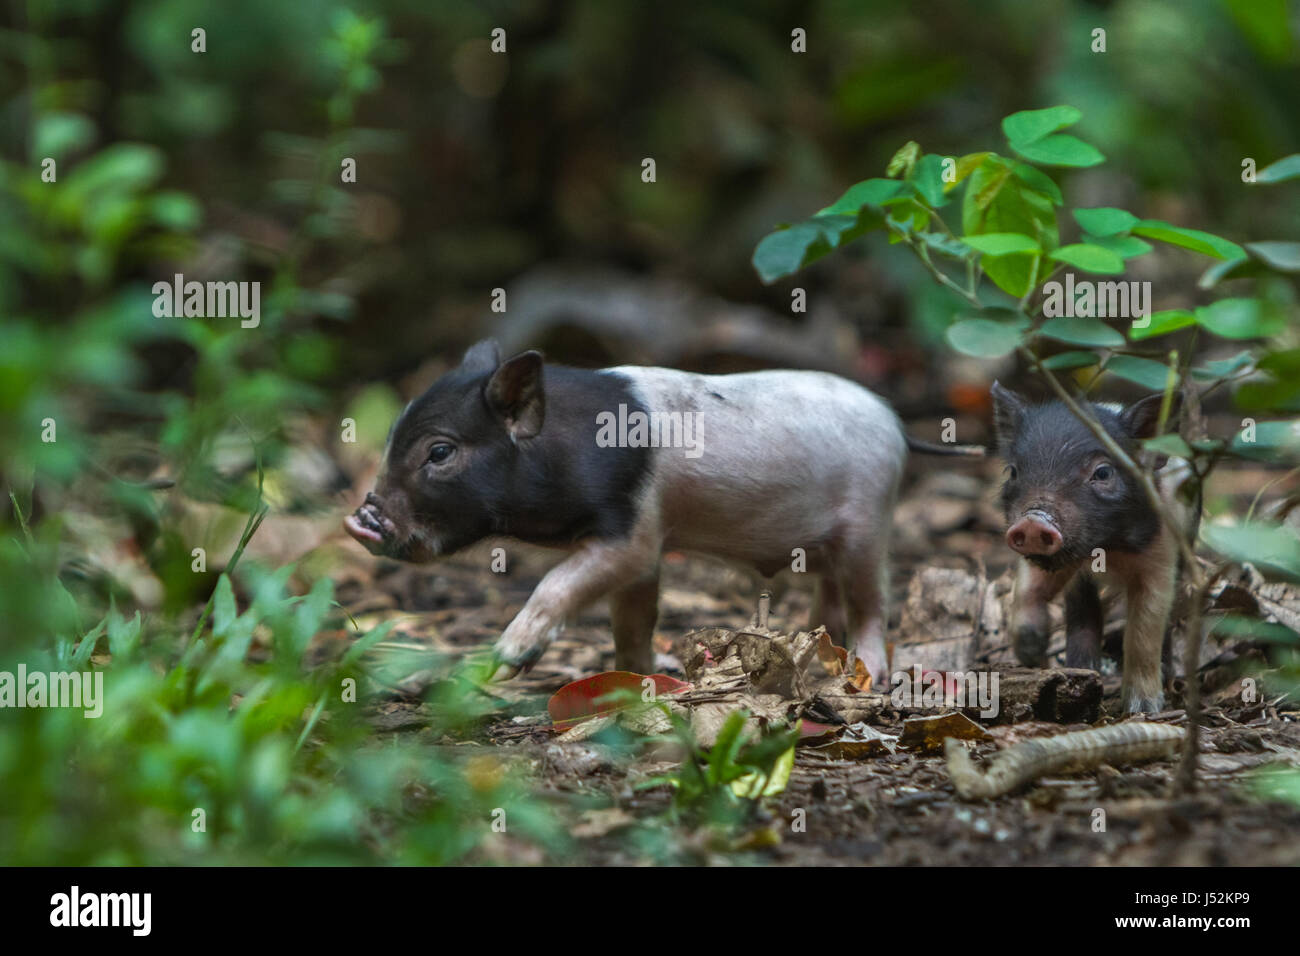 Piglets walking on forest floor in Tangkoko Nature Park, which is located near Batuputih village in Ranowulu, Bitung, North Sulawesi, Indonesia. Stock Photo